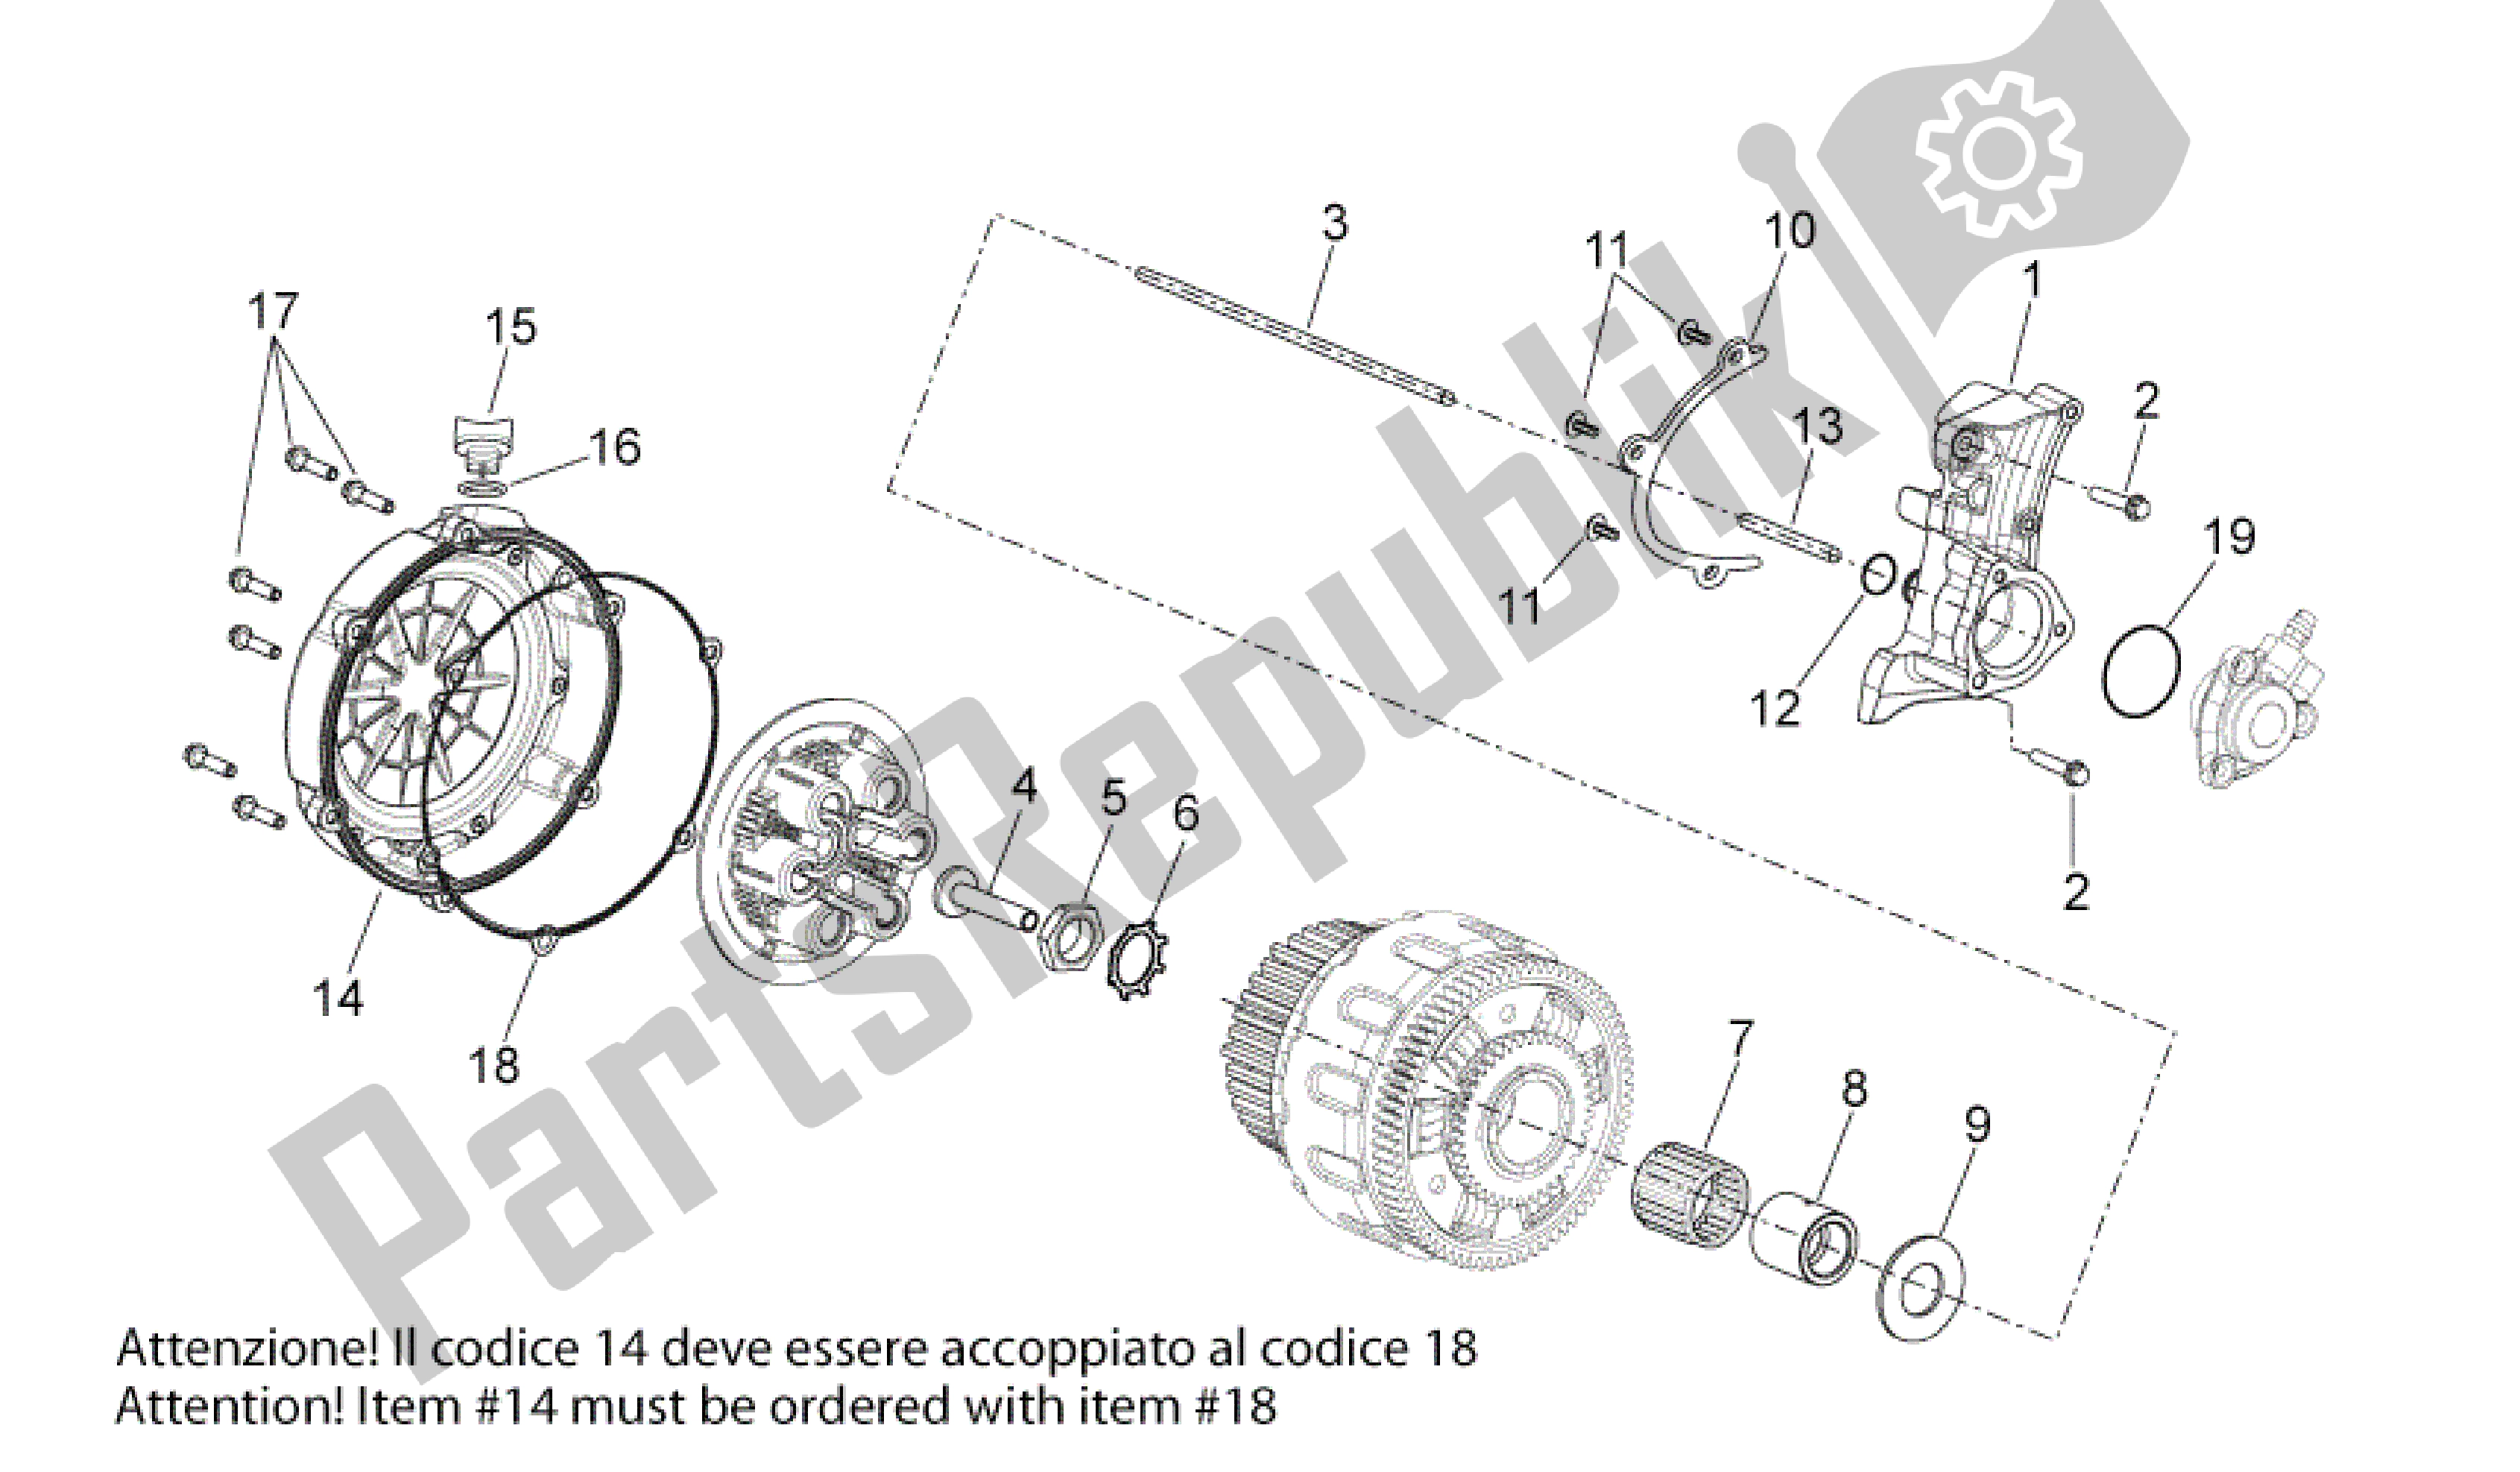 All parts for the Clutch I of the Aprilia Shiver 750 2007 - 2009